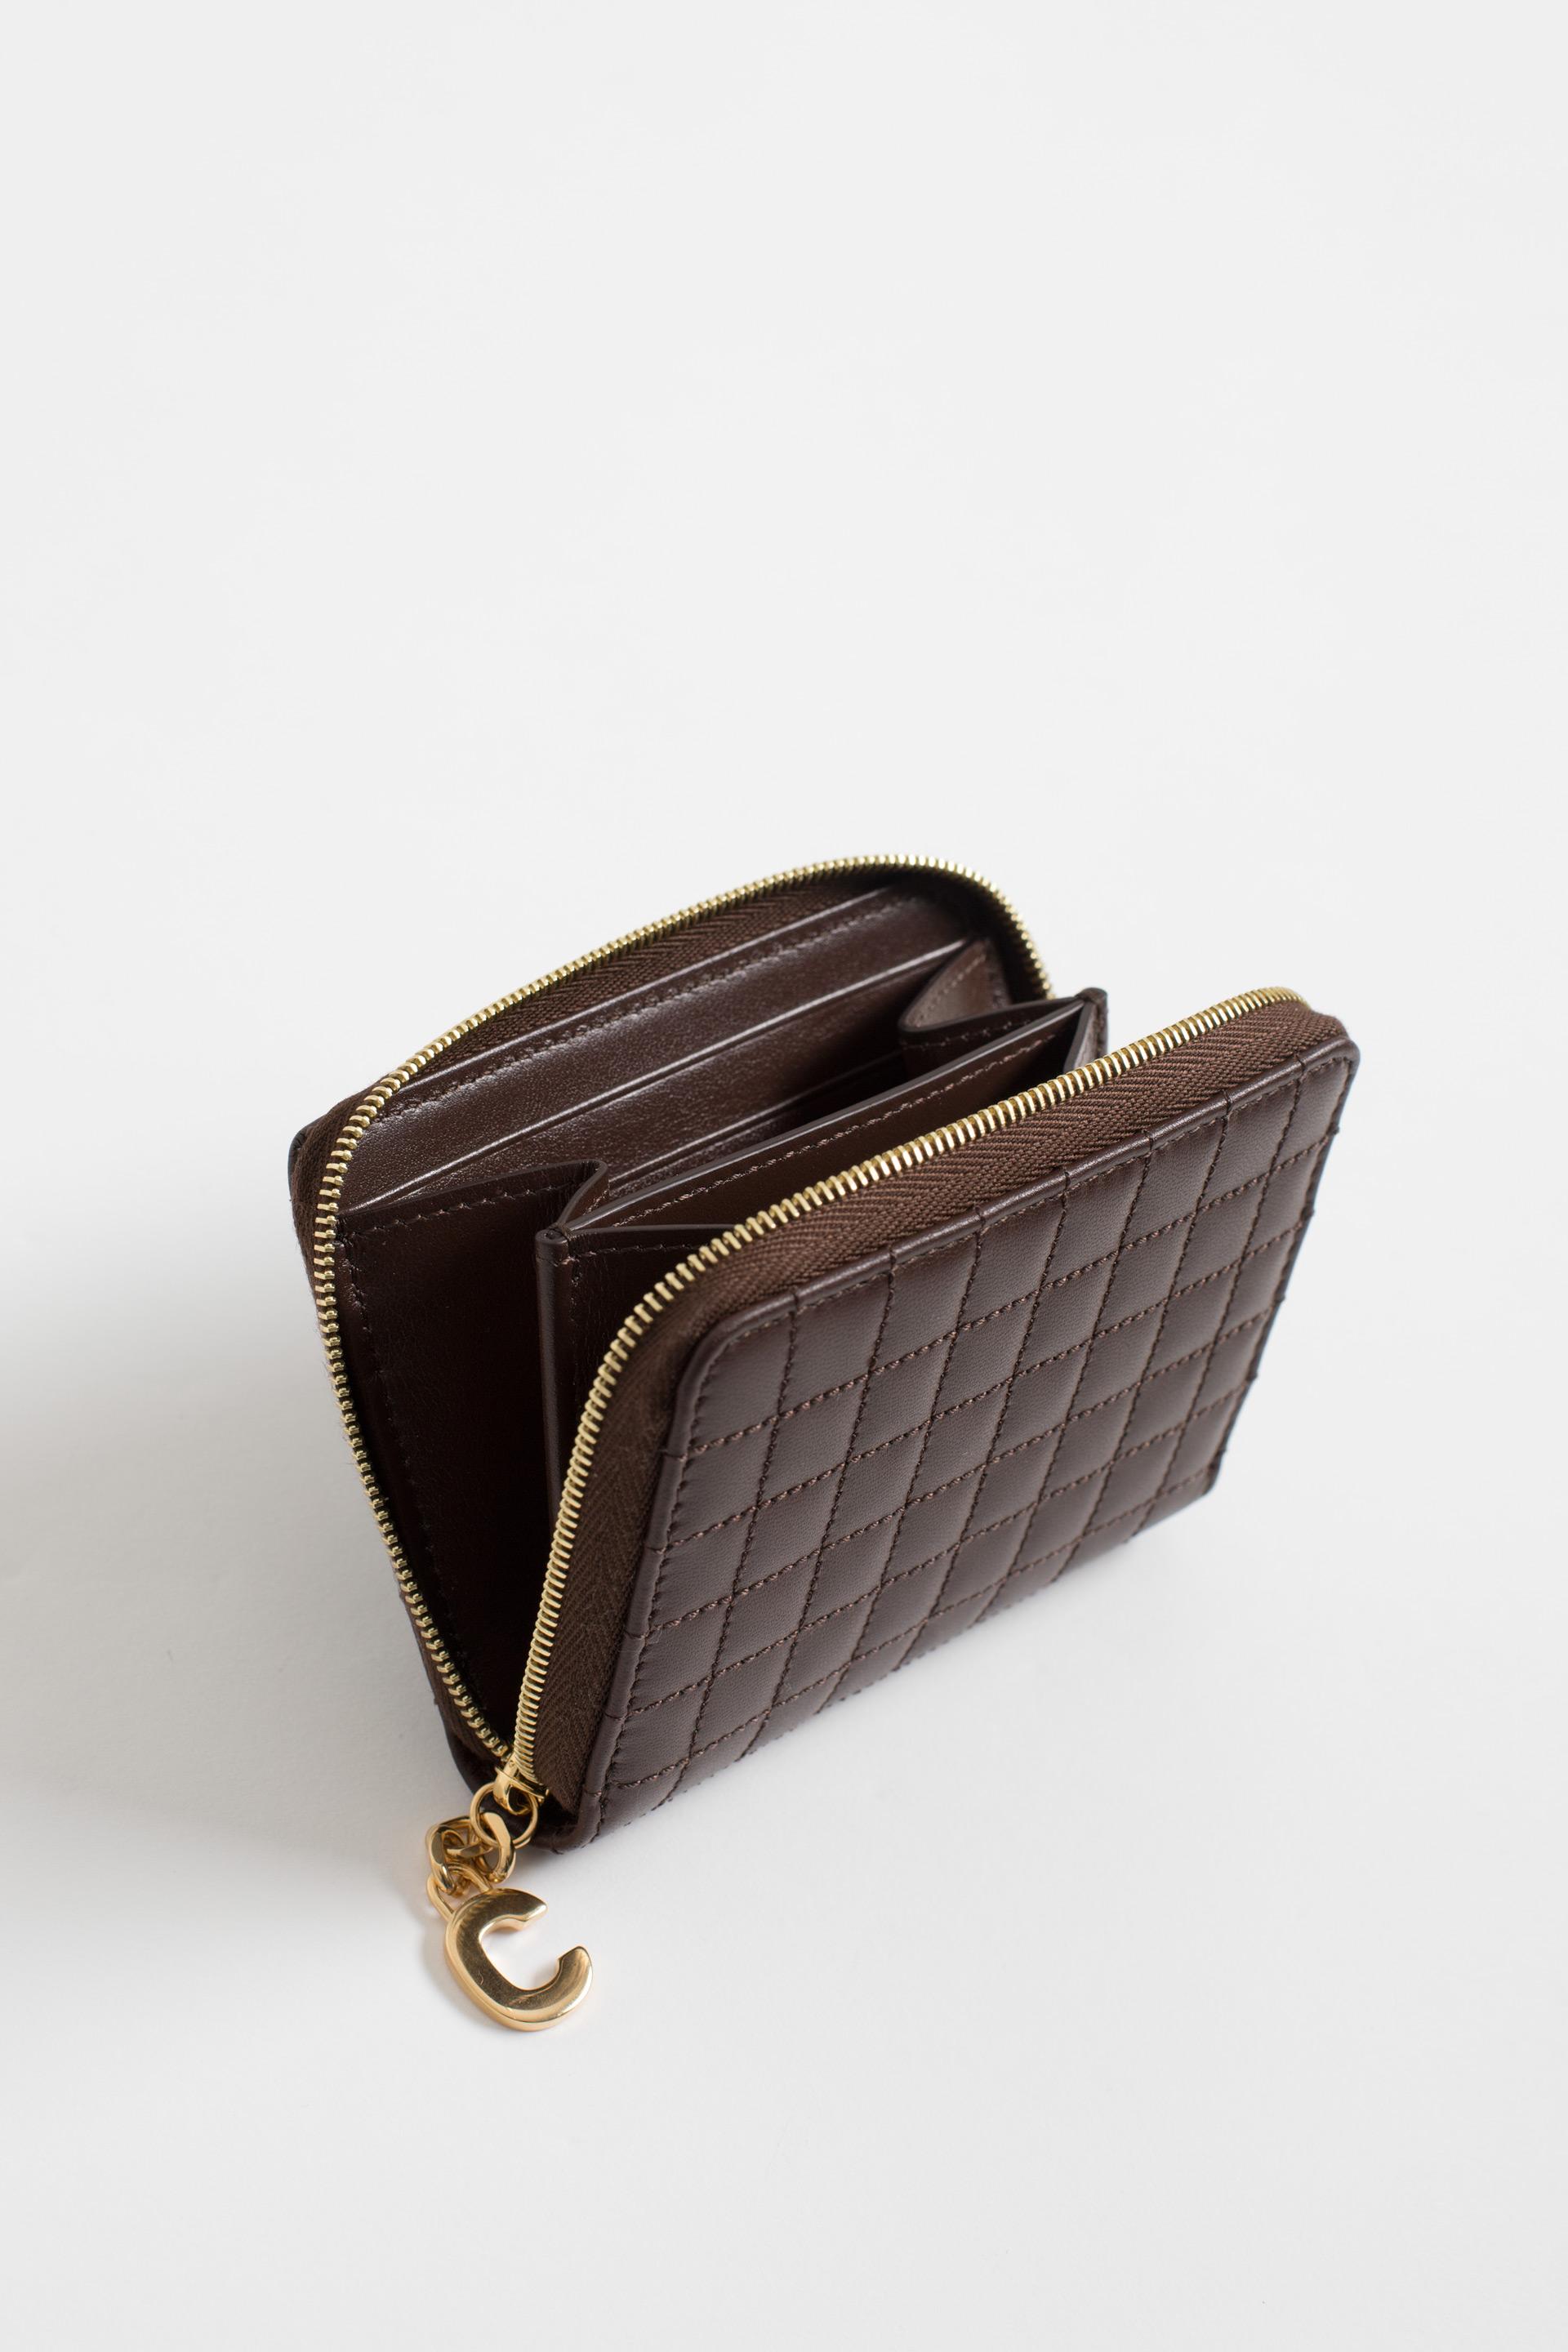 Celine Leather C Charm Compact Zipped Quilted Wallet in Brown - Lyst